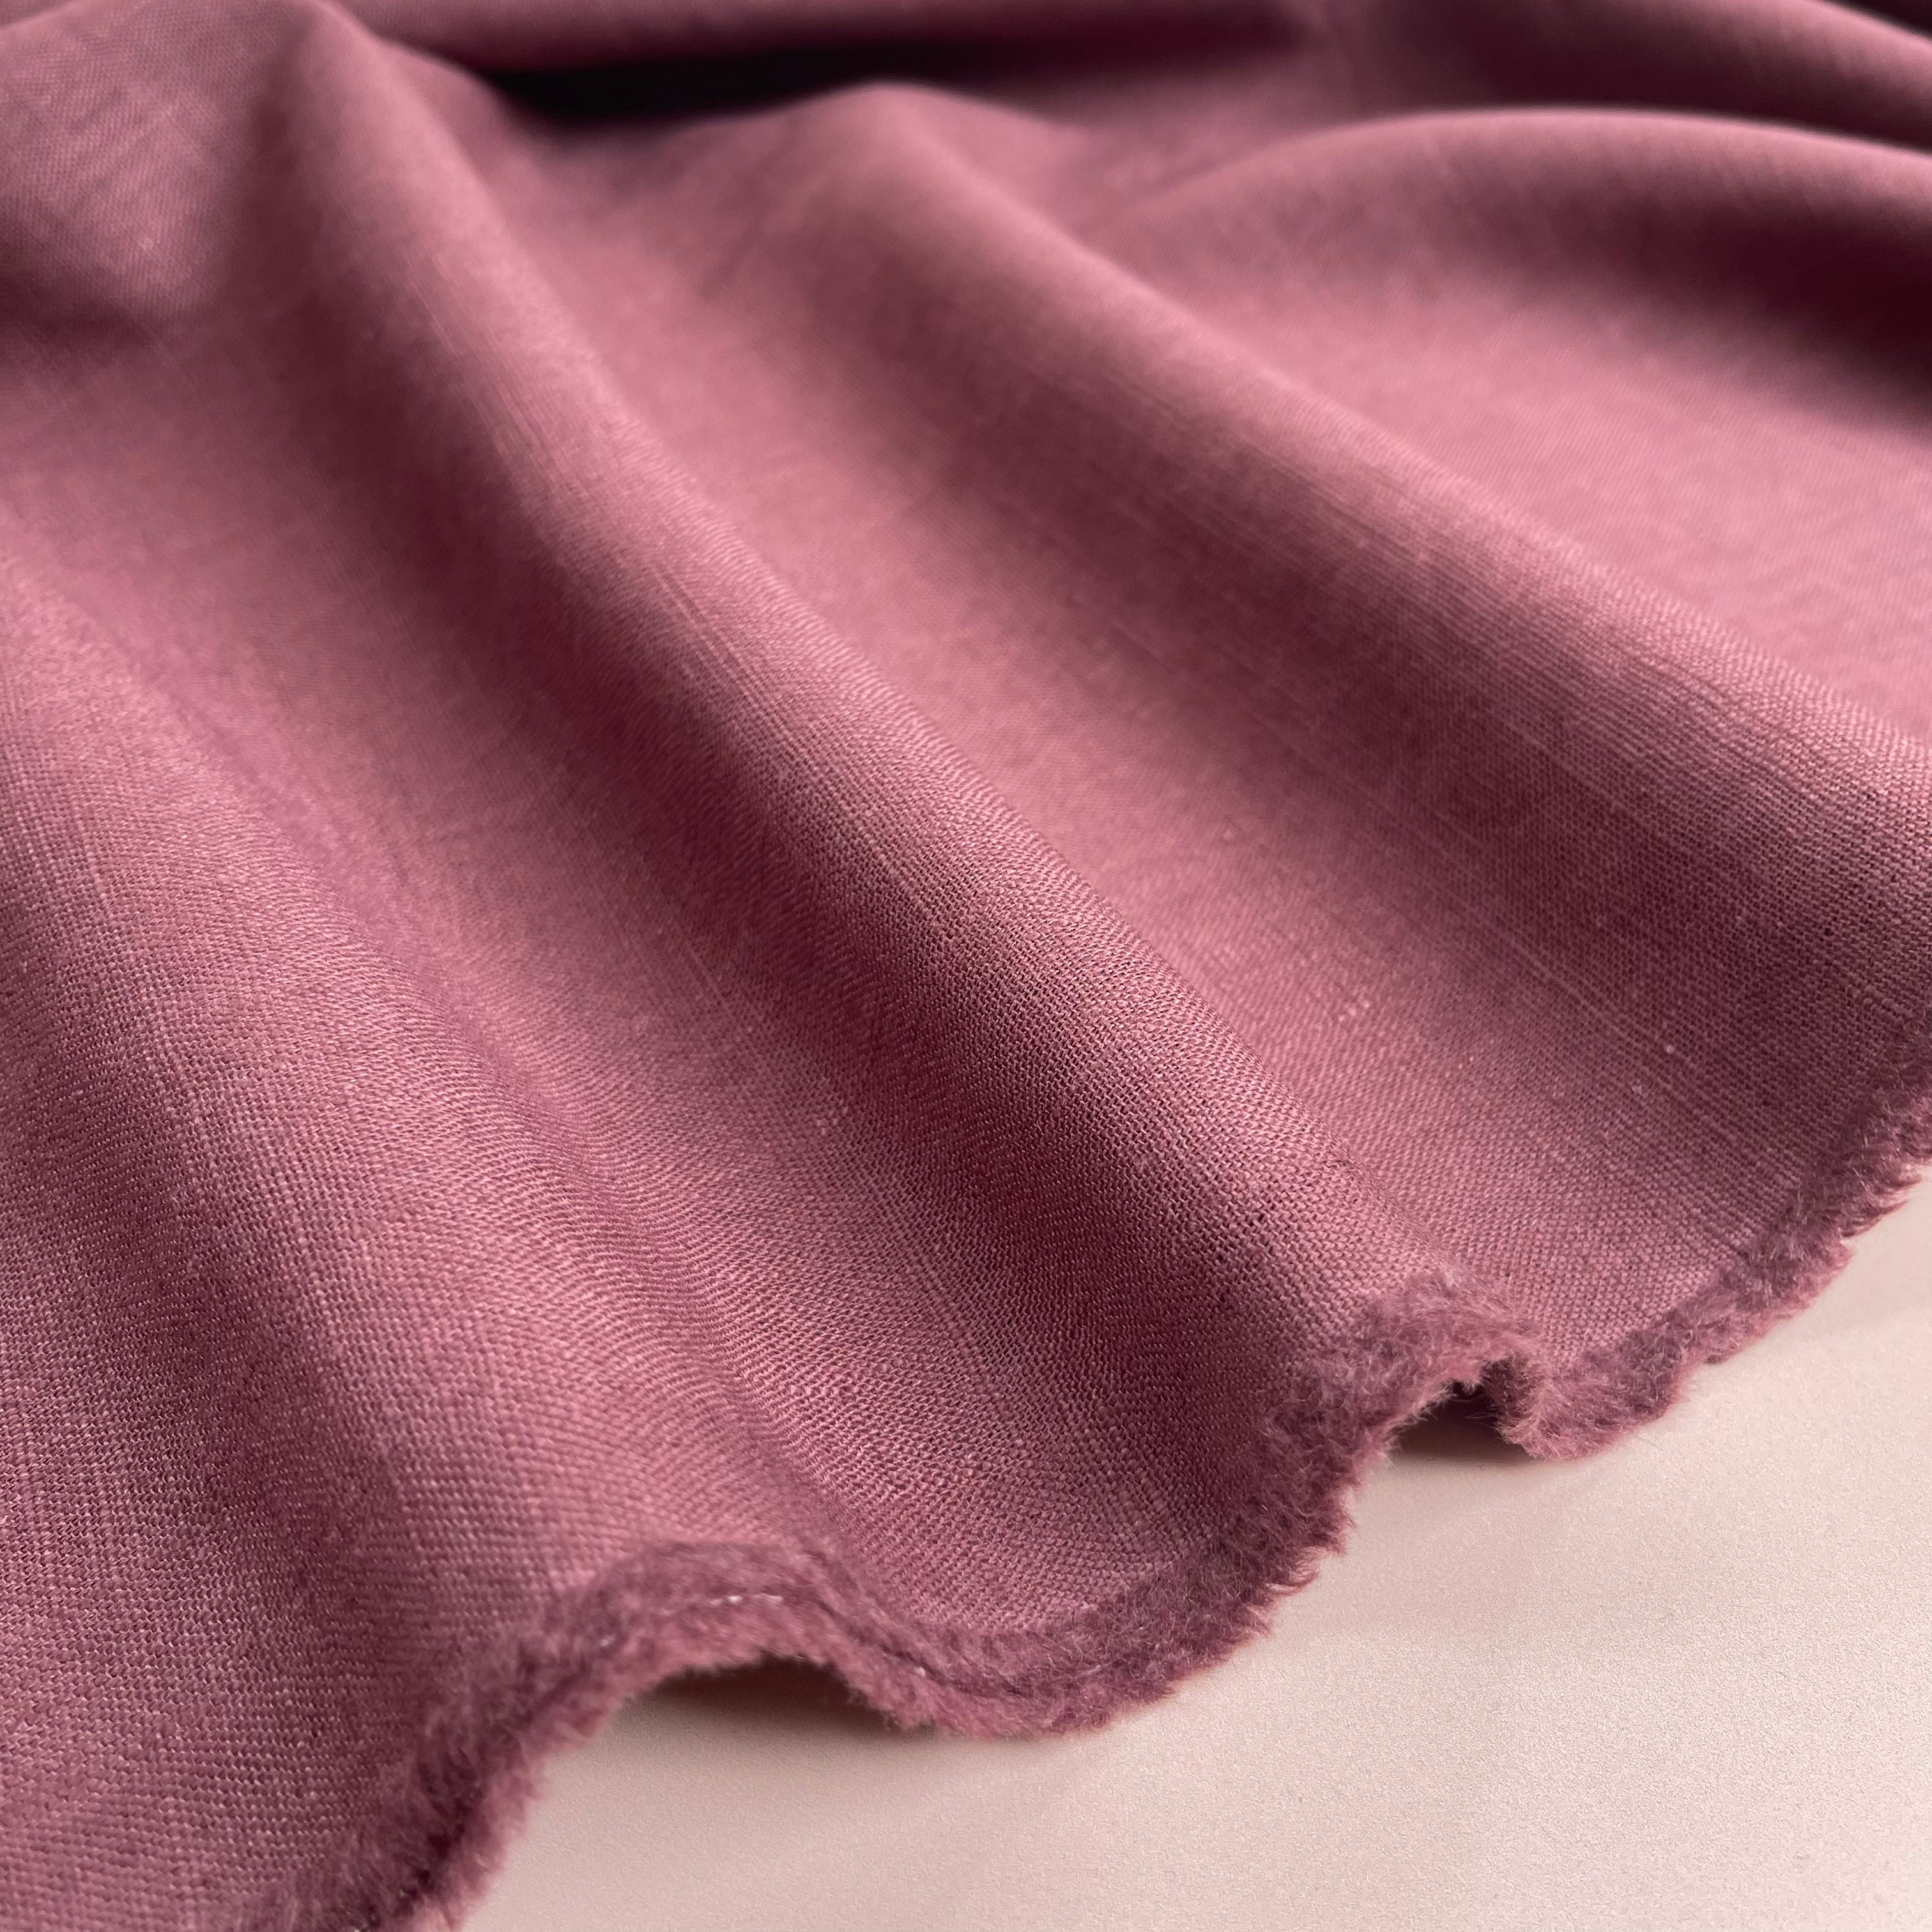 REMNANT 0.25 Metres (plus extra 4cm with fault) Breeze Cream Aubergine - Enzyme Washed Pure Linen Fabric